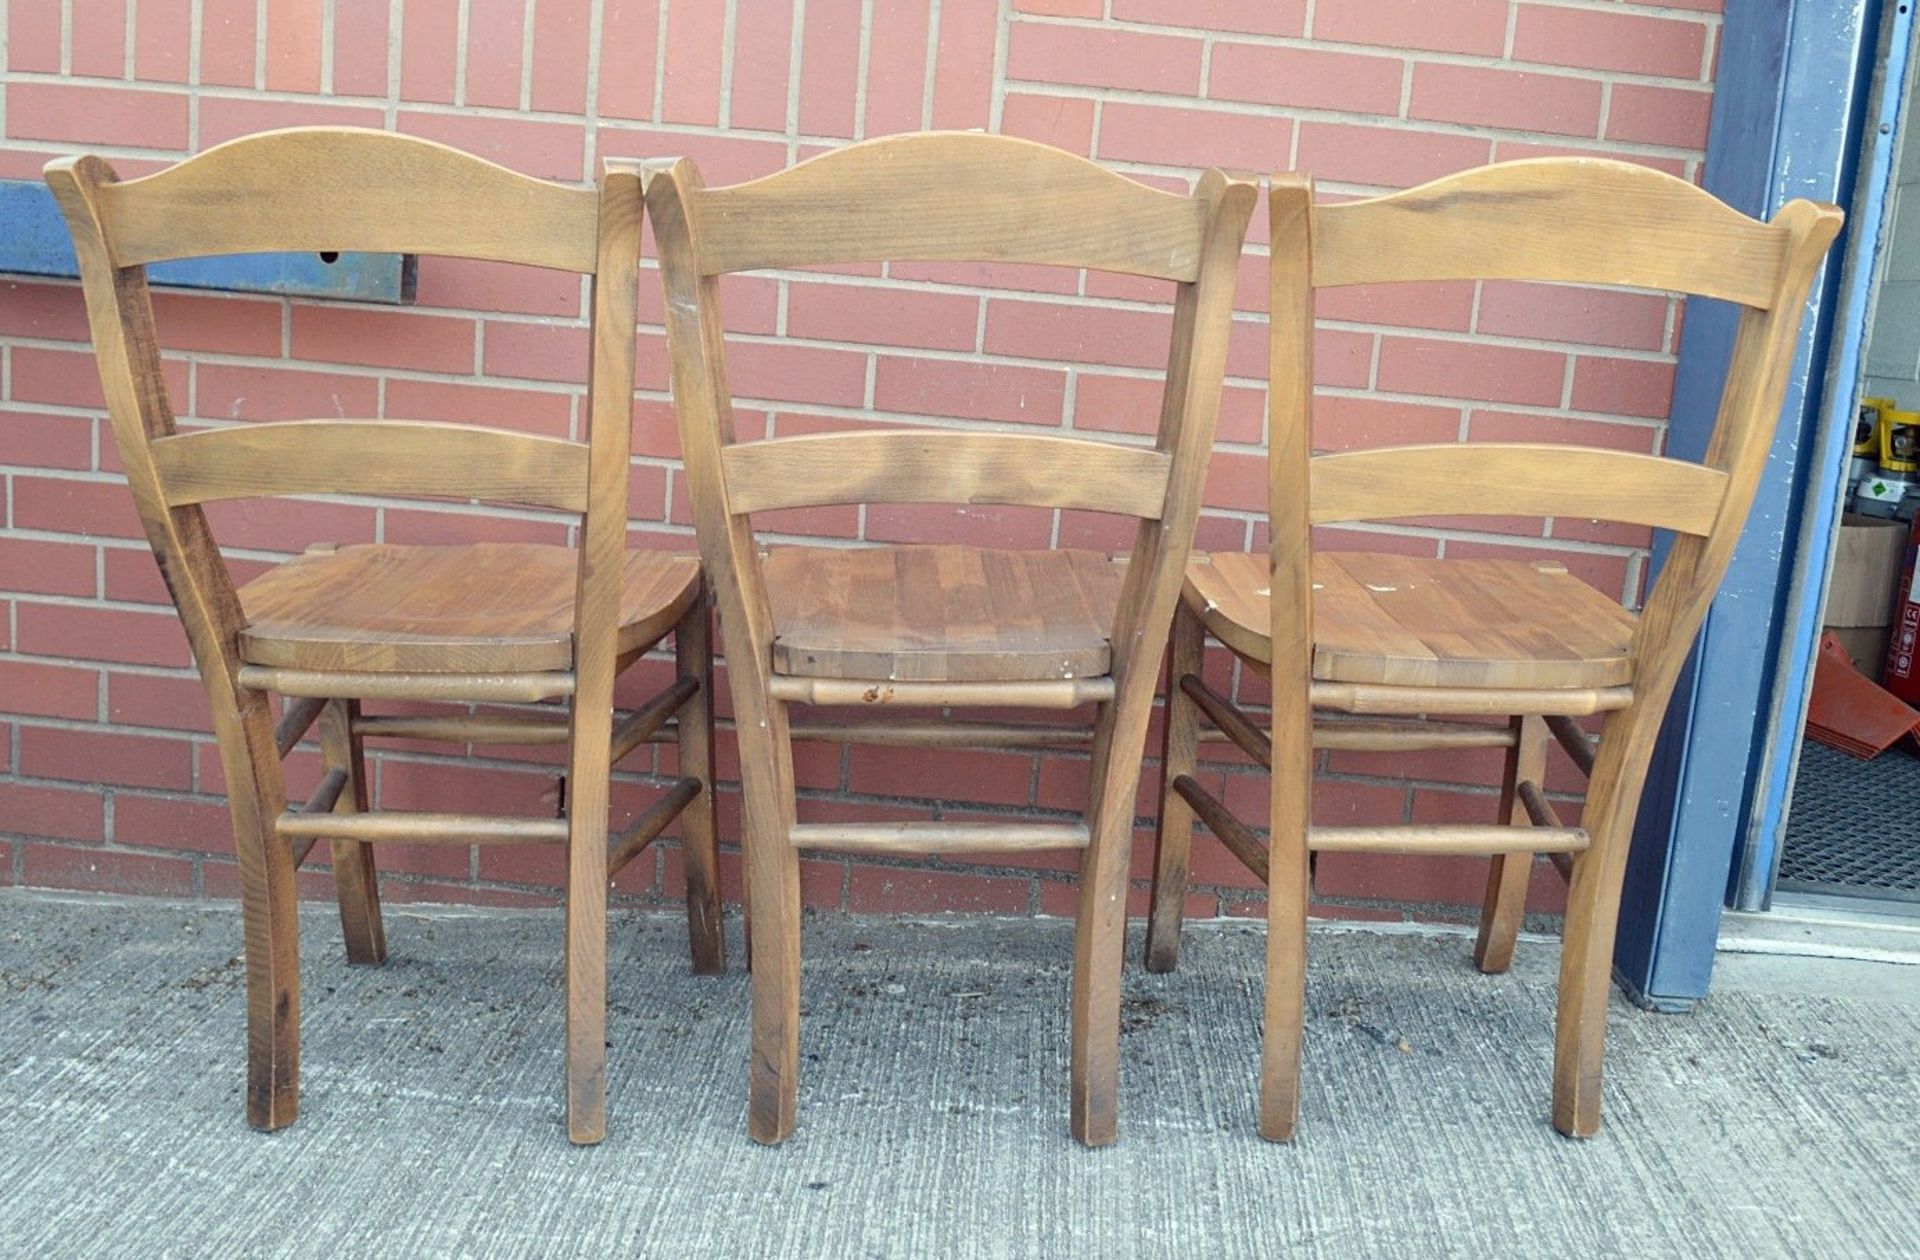 3 x Matching Sturdy Solid Wood Chairs With An Attractive Varnished Finish - Dimensions: H90 x W47 - Image 5 of 7